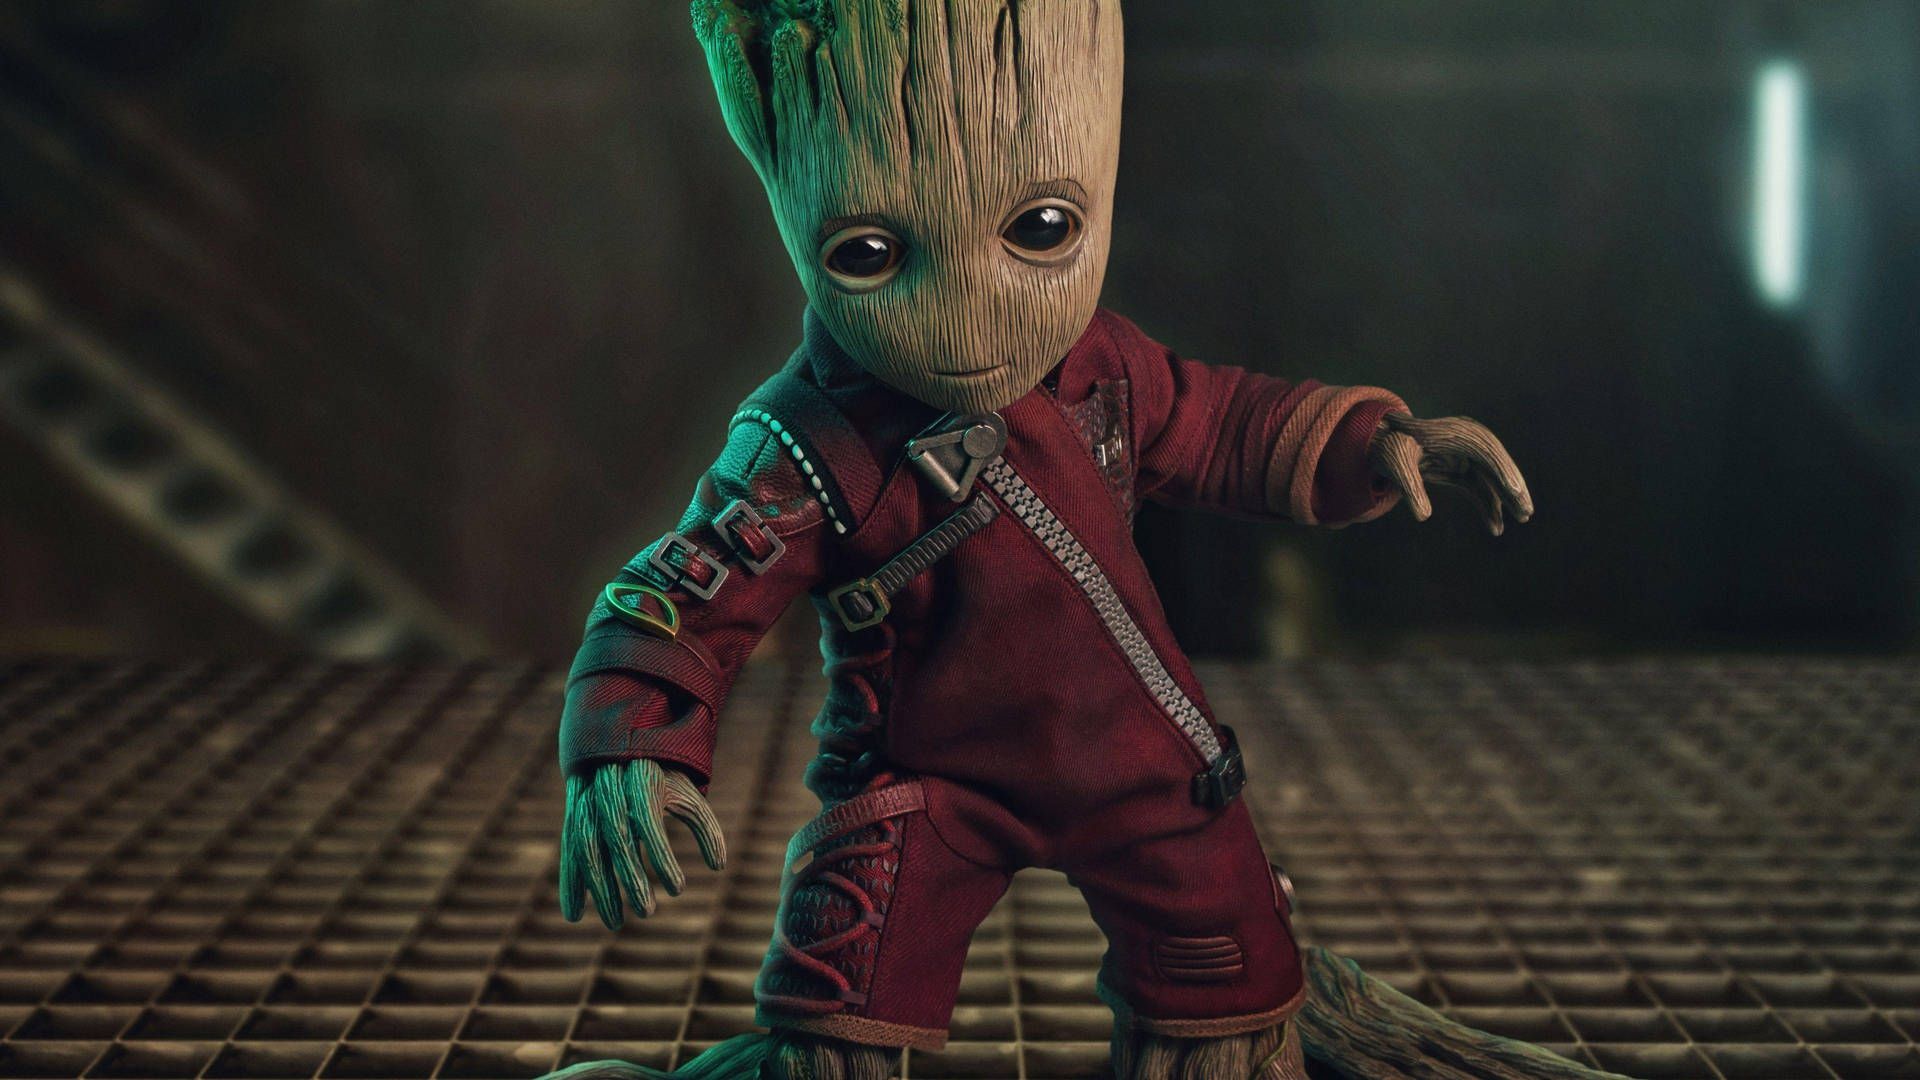 Baby Groot wallpaper 1920x1080 Guardians of the Galaxy 2014 - Guardians of the Galaxy